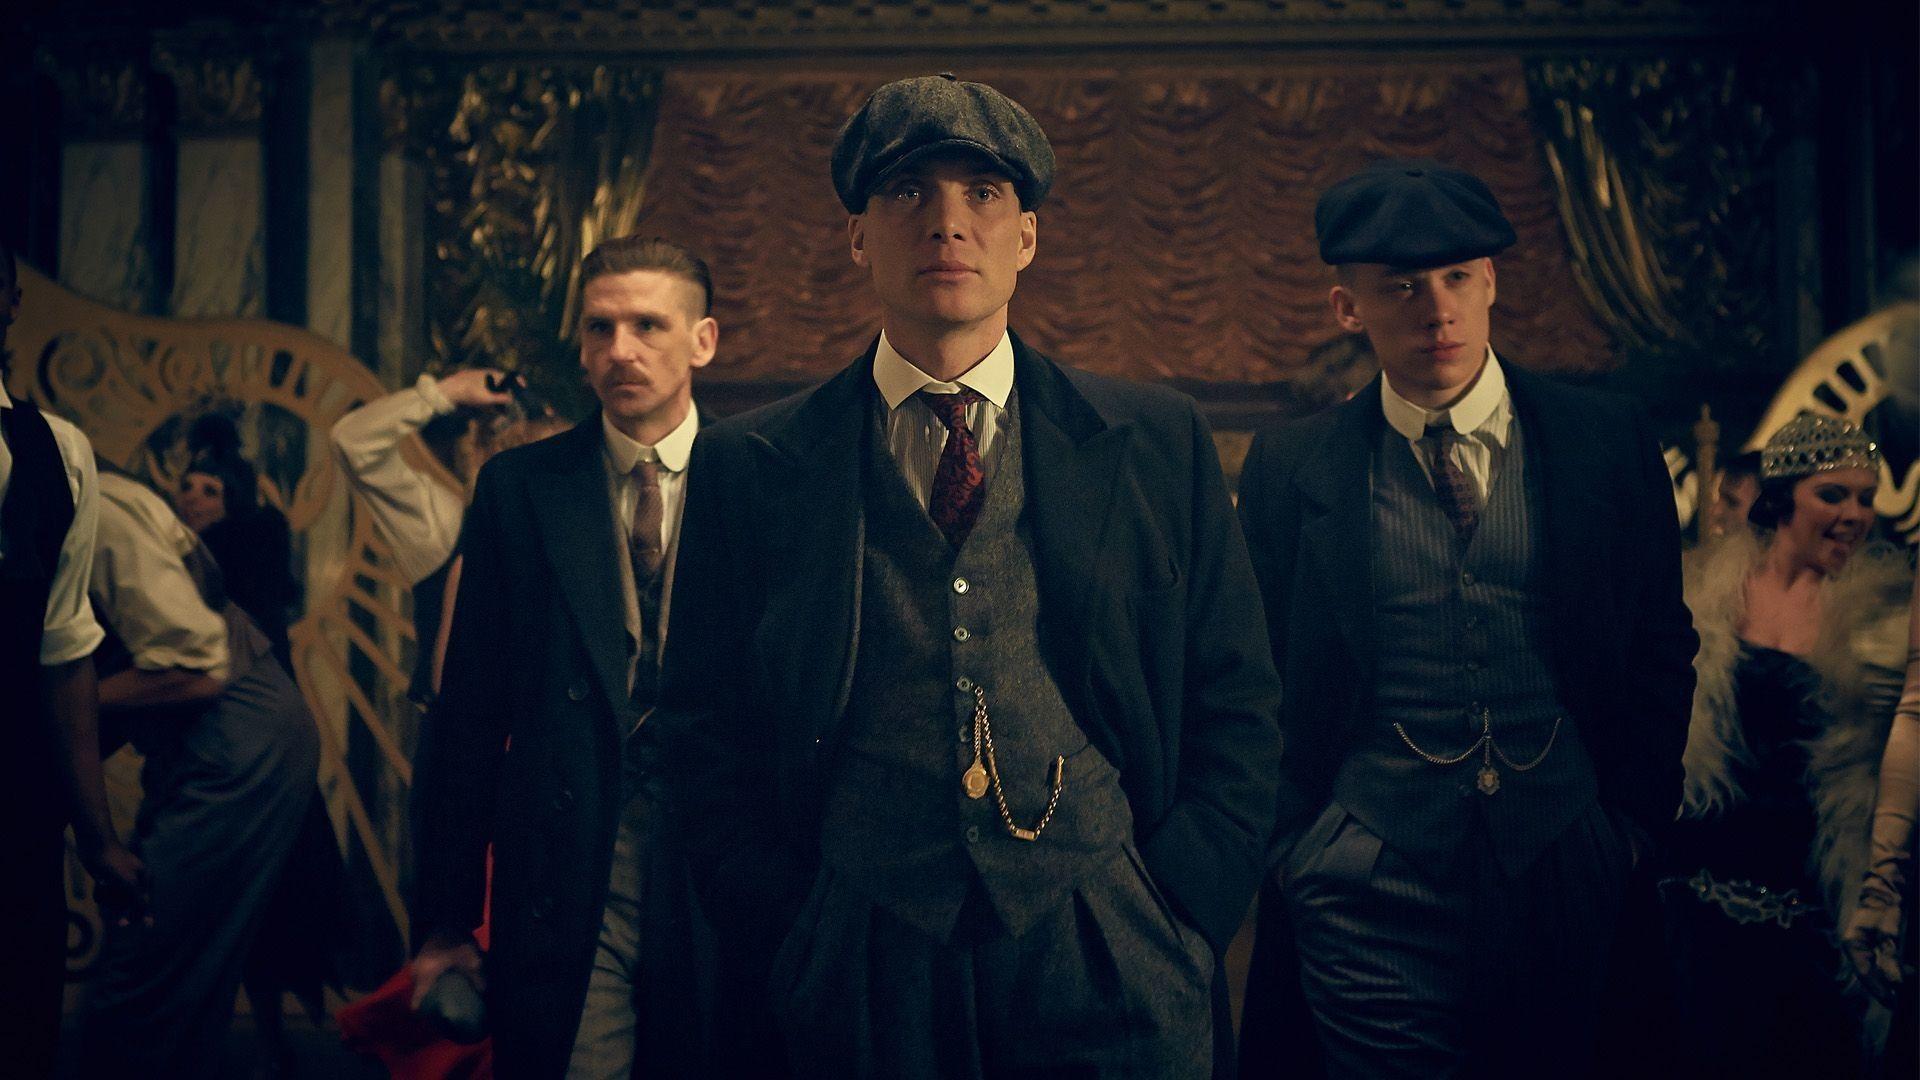 Wallpaper ID: 324840 / TV Show Peaky Blinders Phone Wallpaper, Thomas Shelby,  Cillian Murphy, 1440x2560 free download